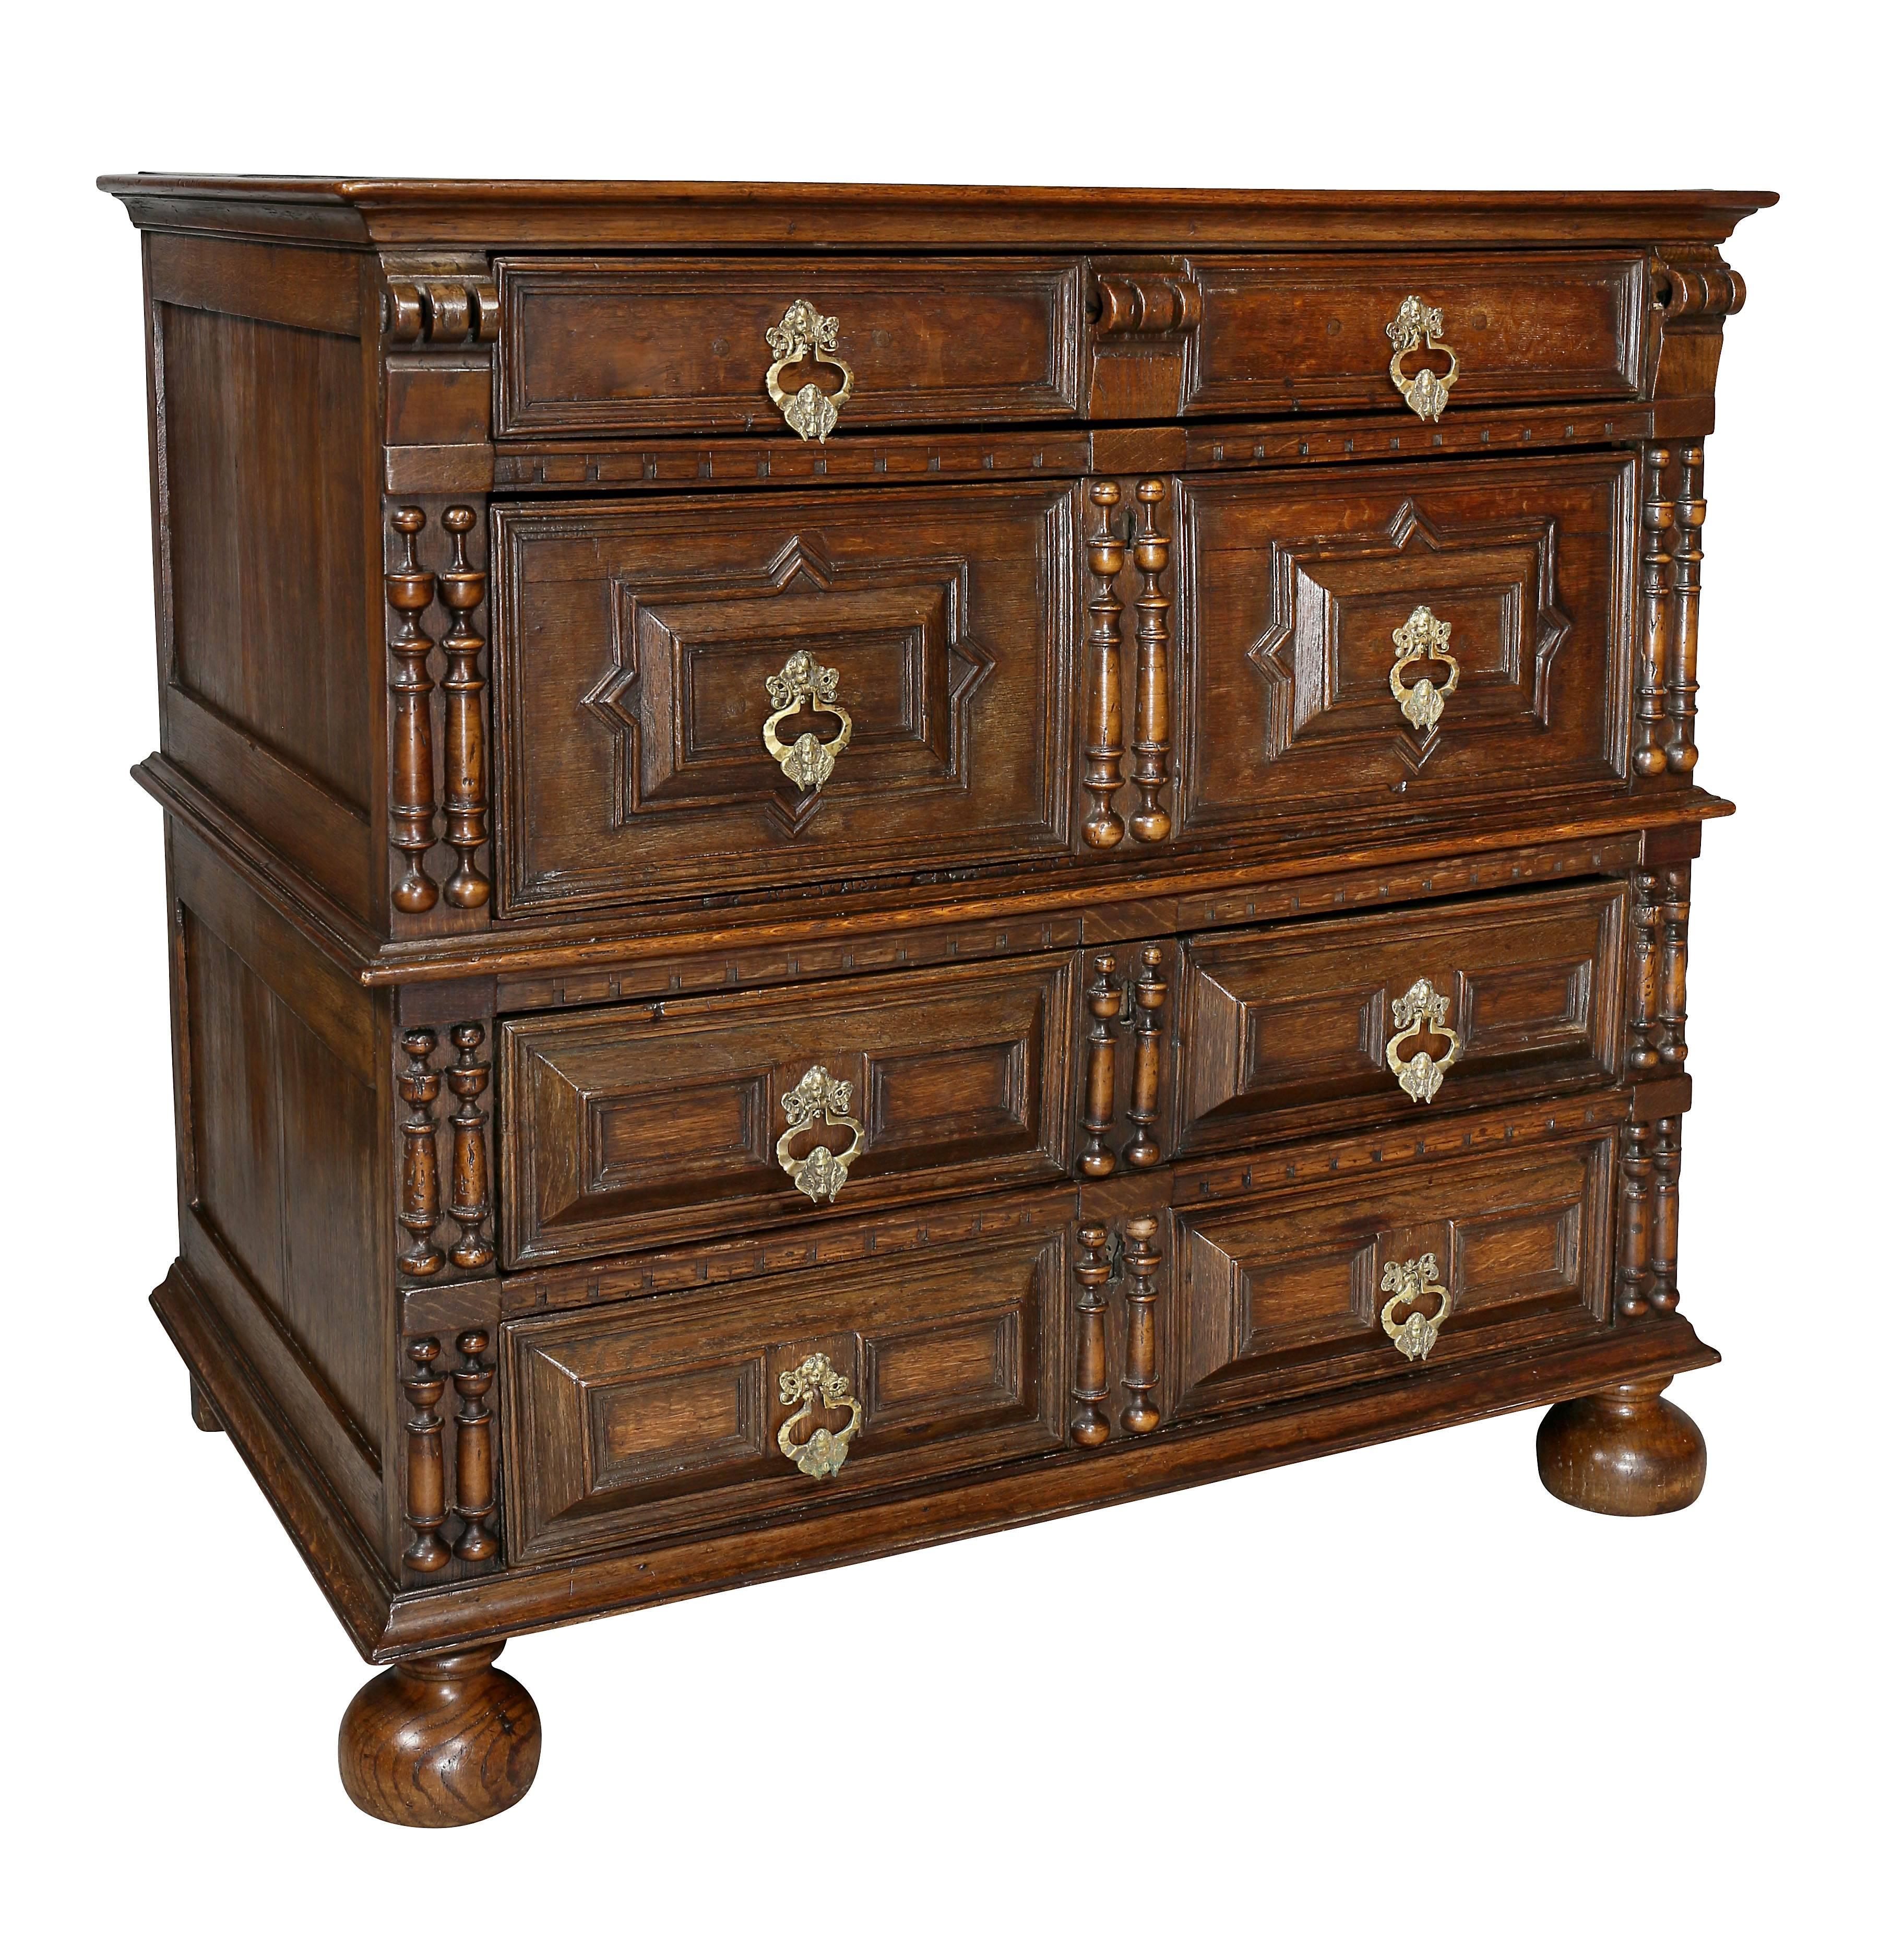 Rectangular top over four drawers with applied split balusters, raised on bun feet.